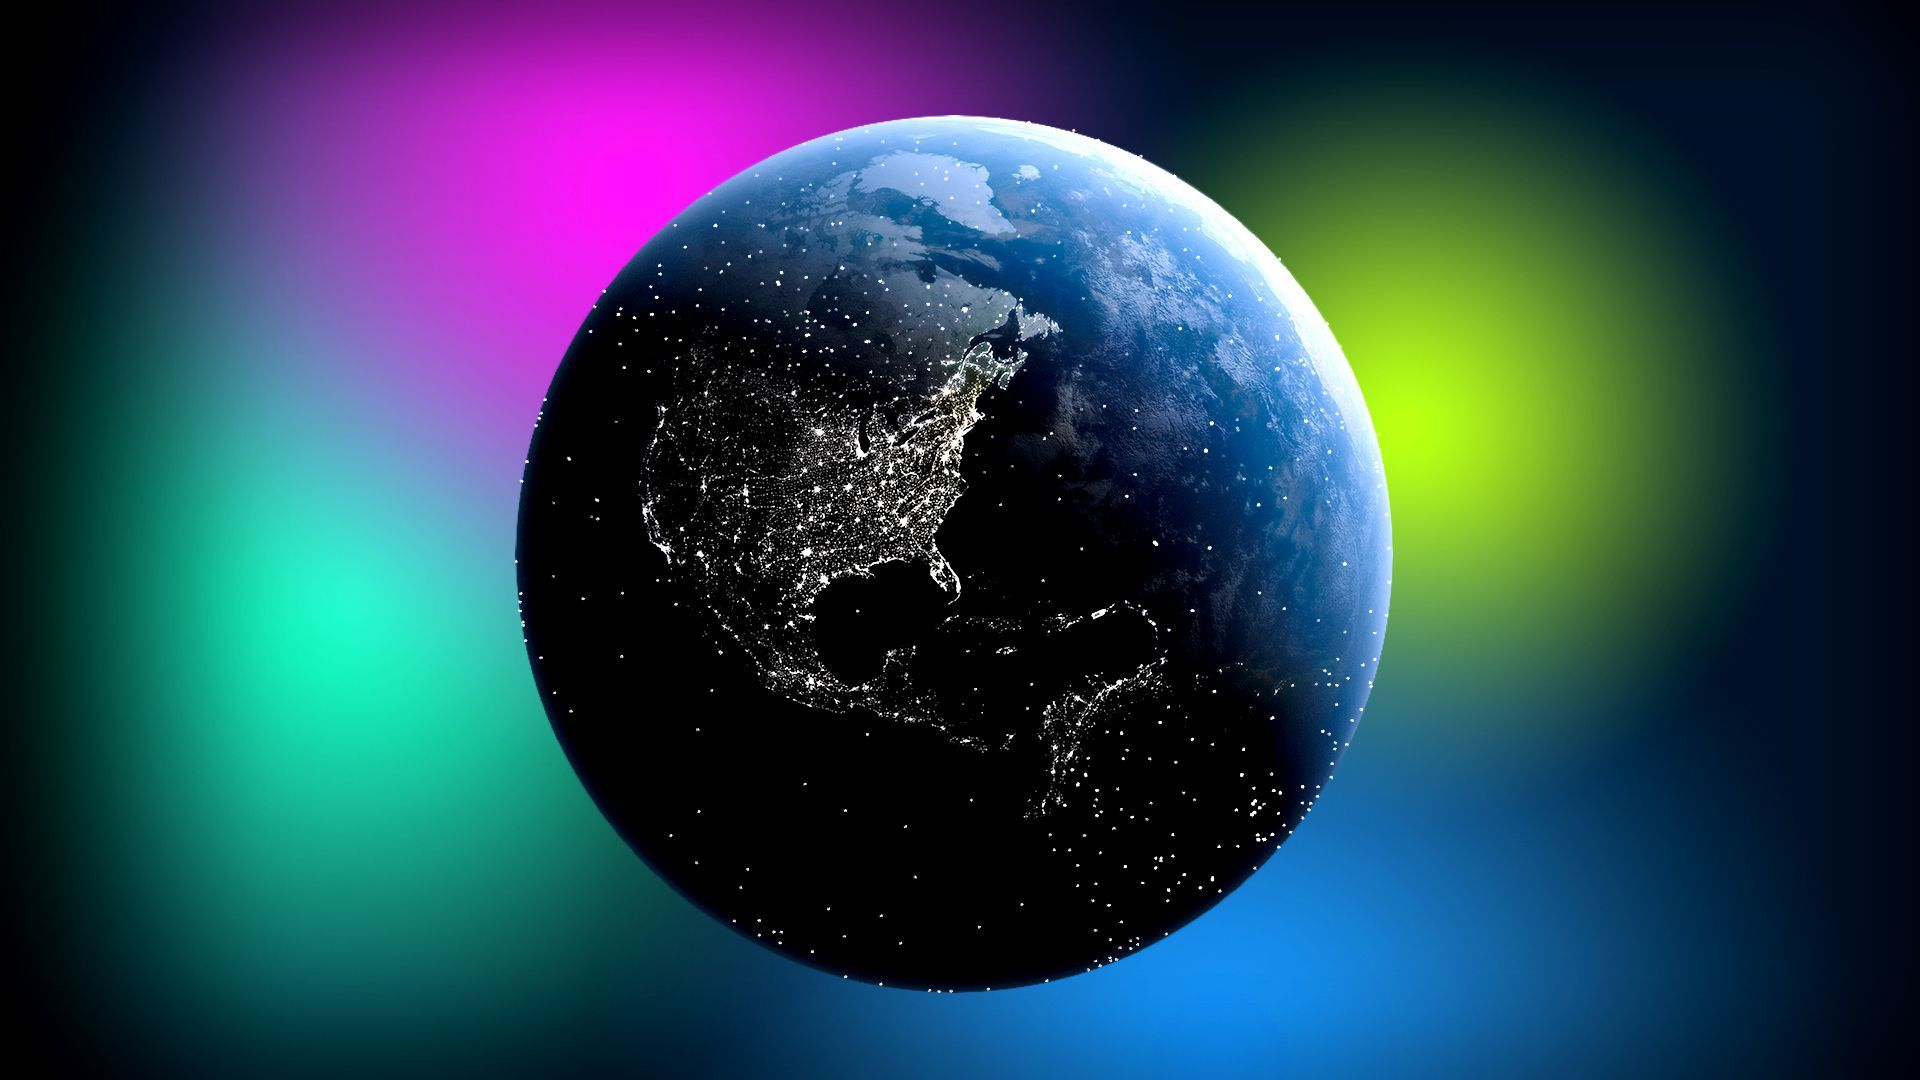 Illustration of the earth speckled with lights set on a colorful background